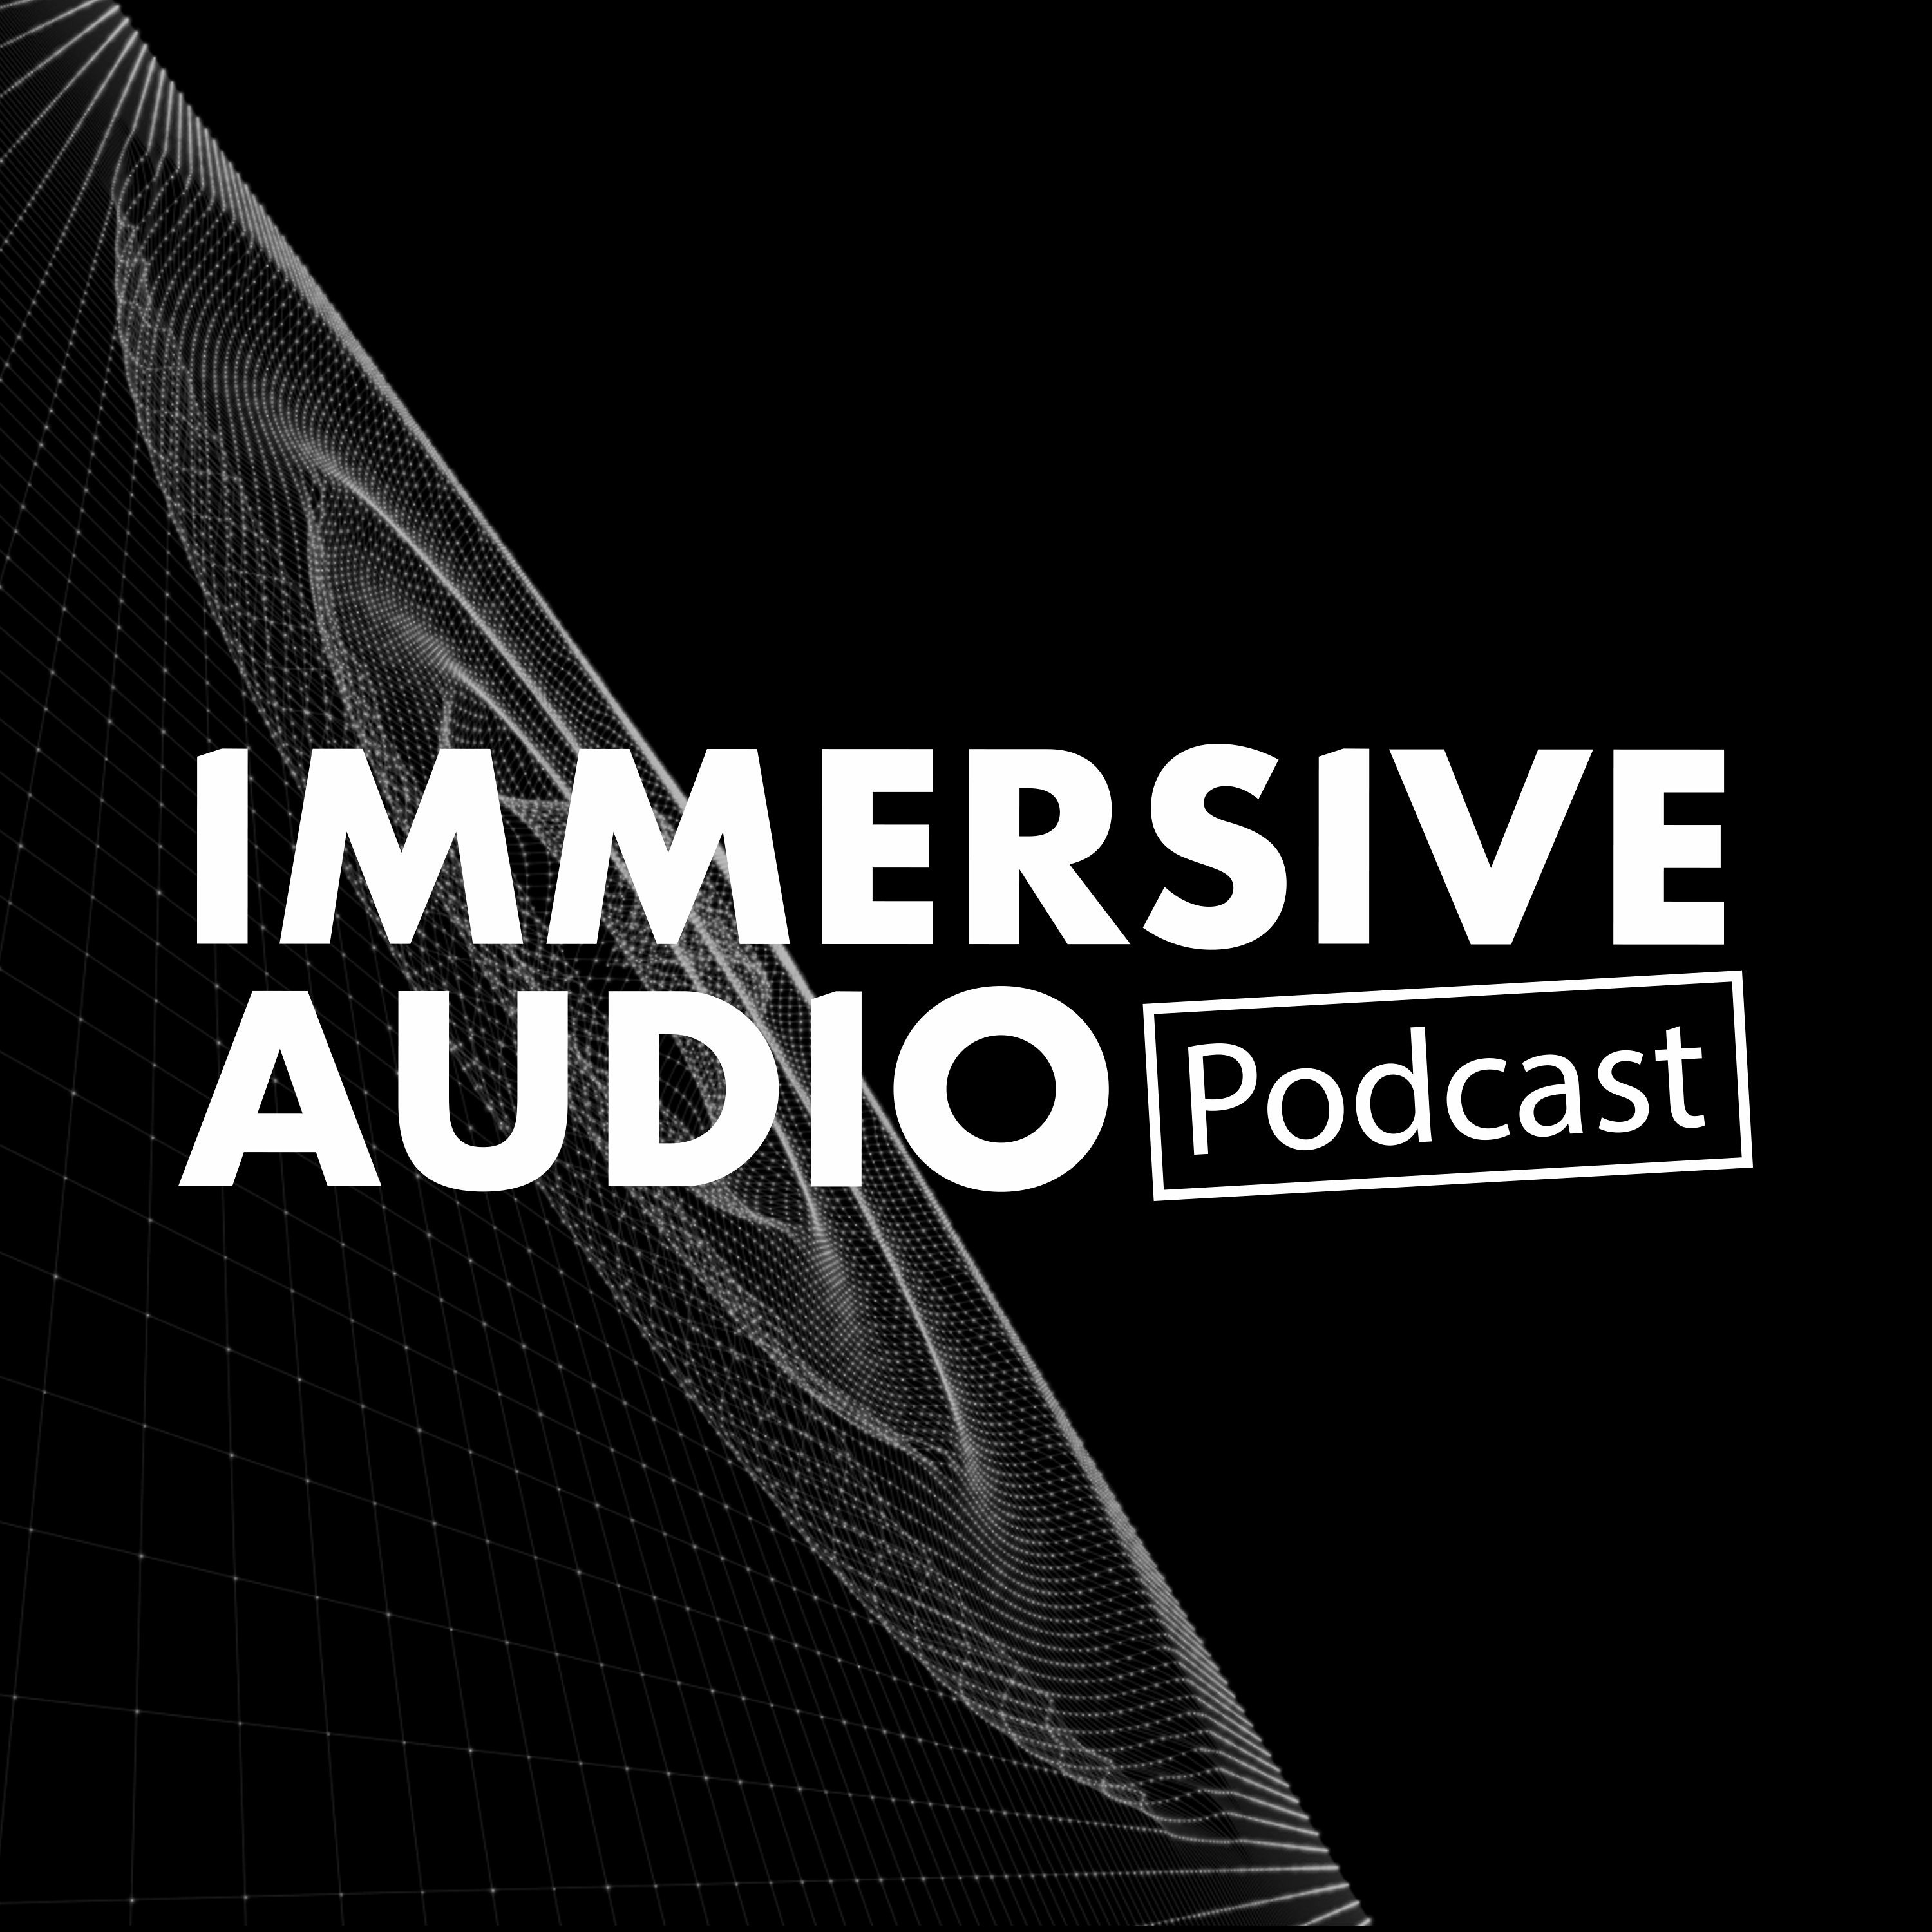 Immersive Audio Podcast Episode 28 Audio For Augmented Reality